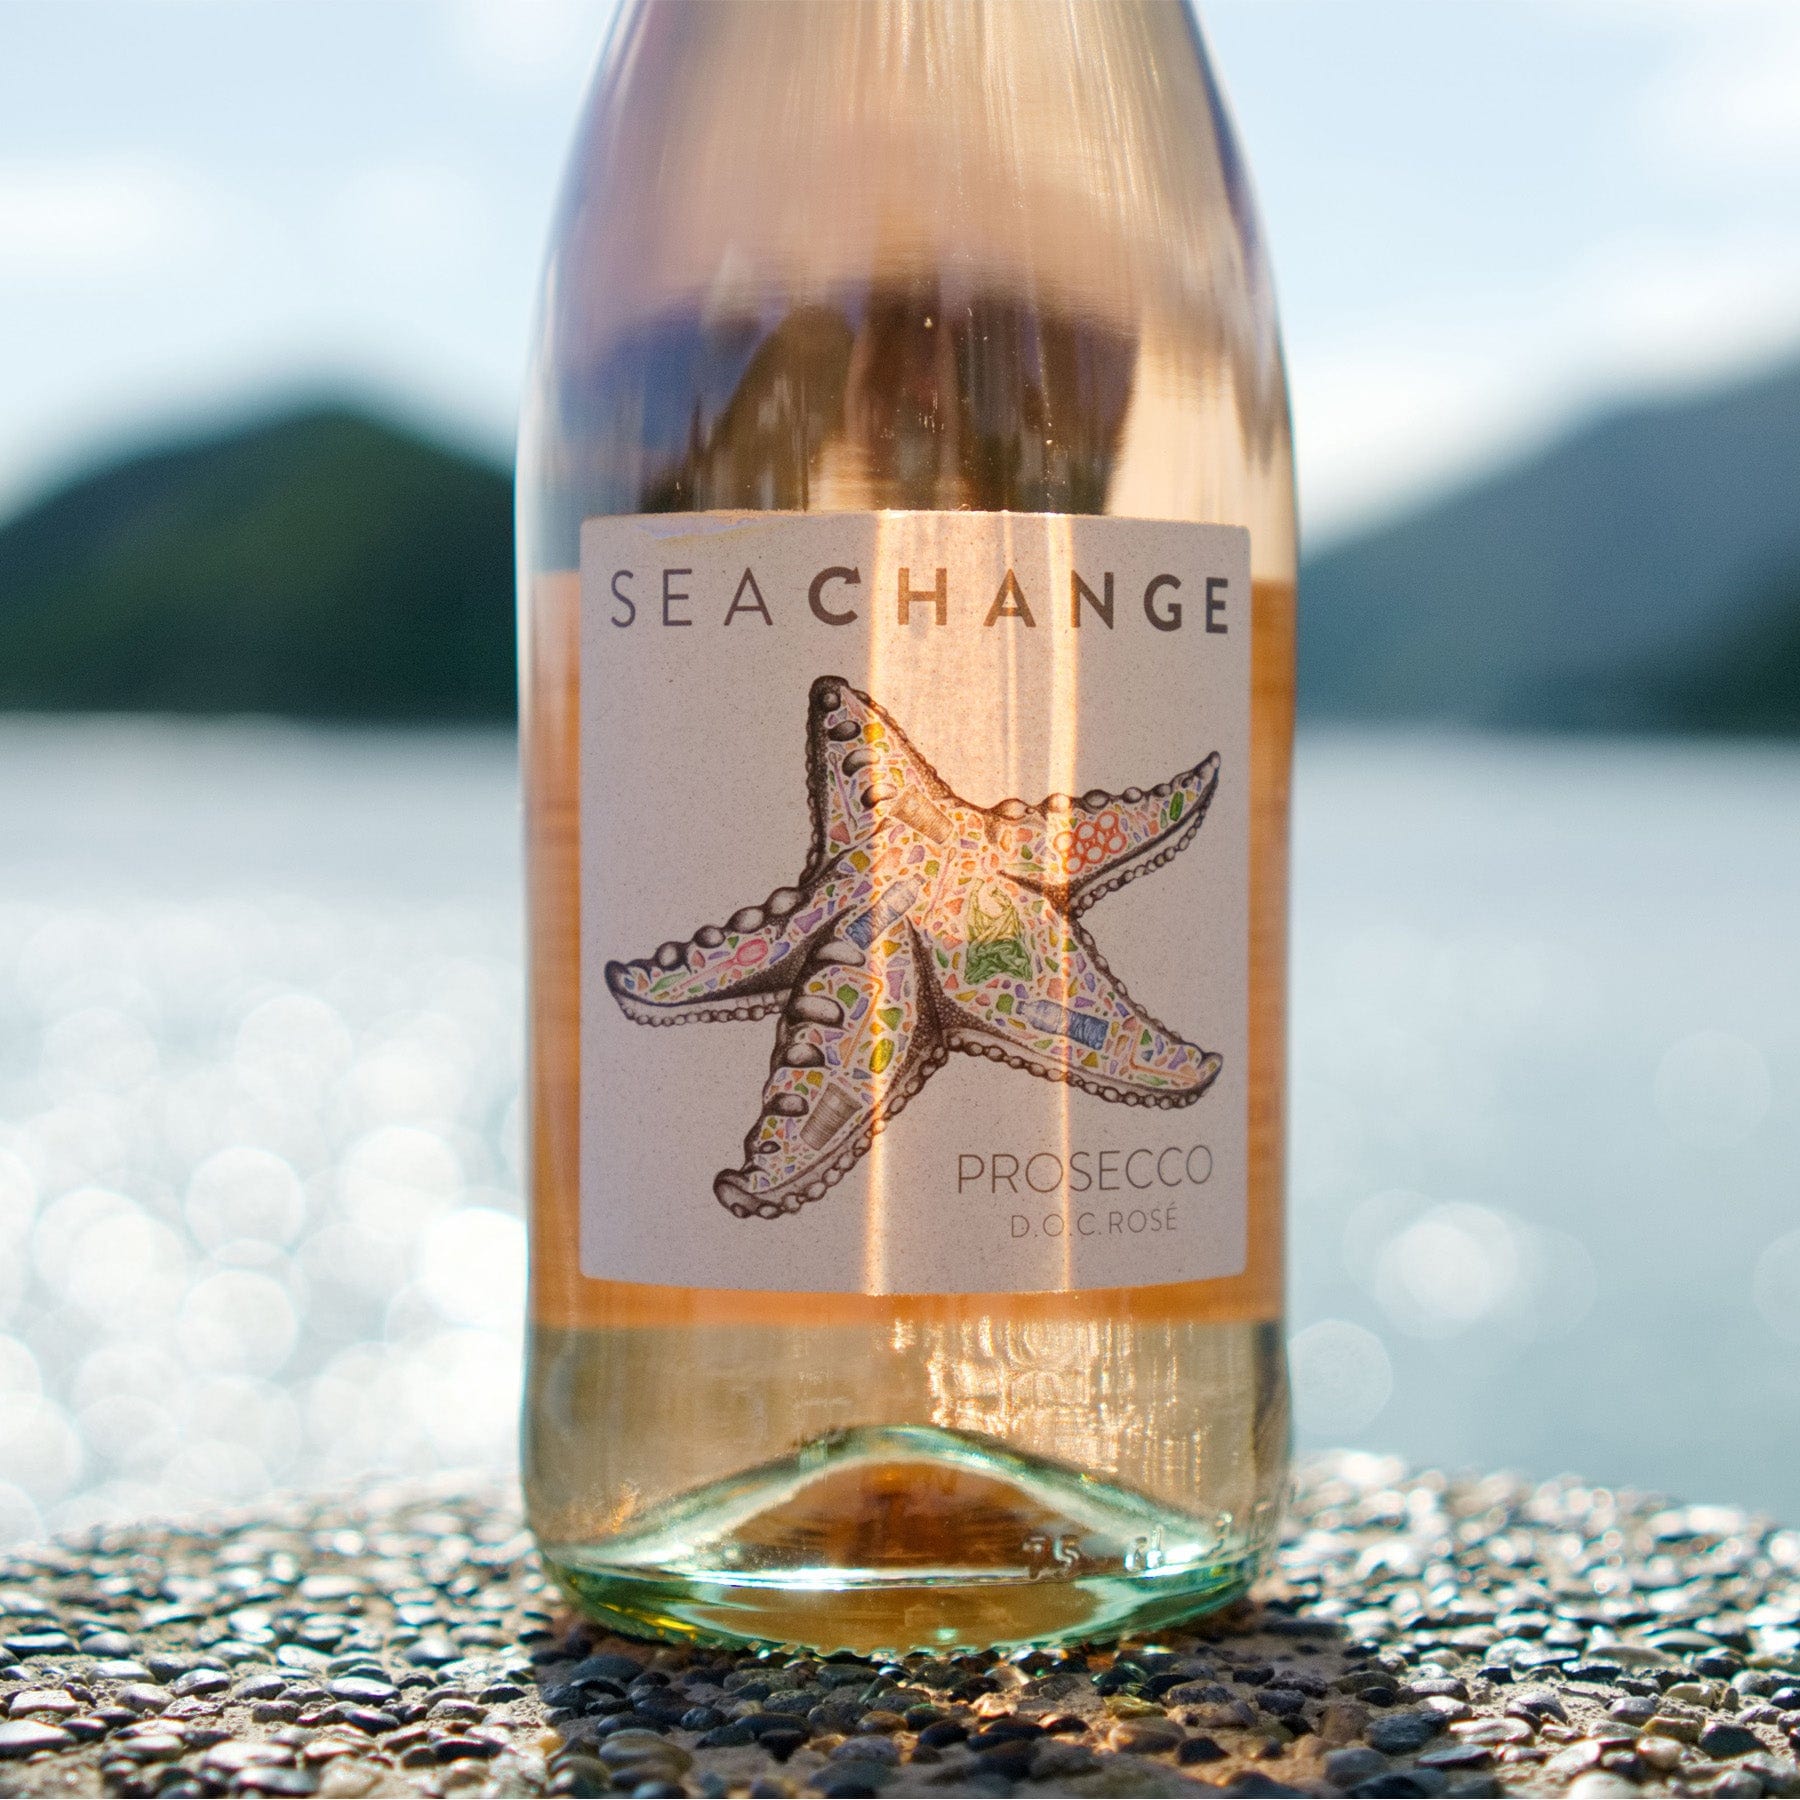 Bottle of Seachange Prosecco rosé with starfish label on pebble beach with sunlit water backdrop